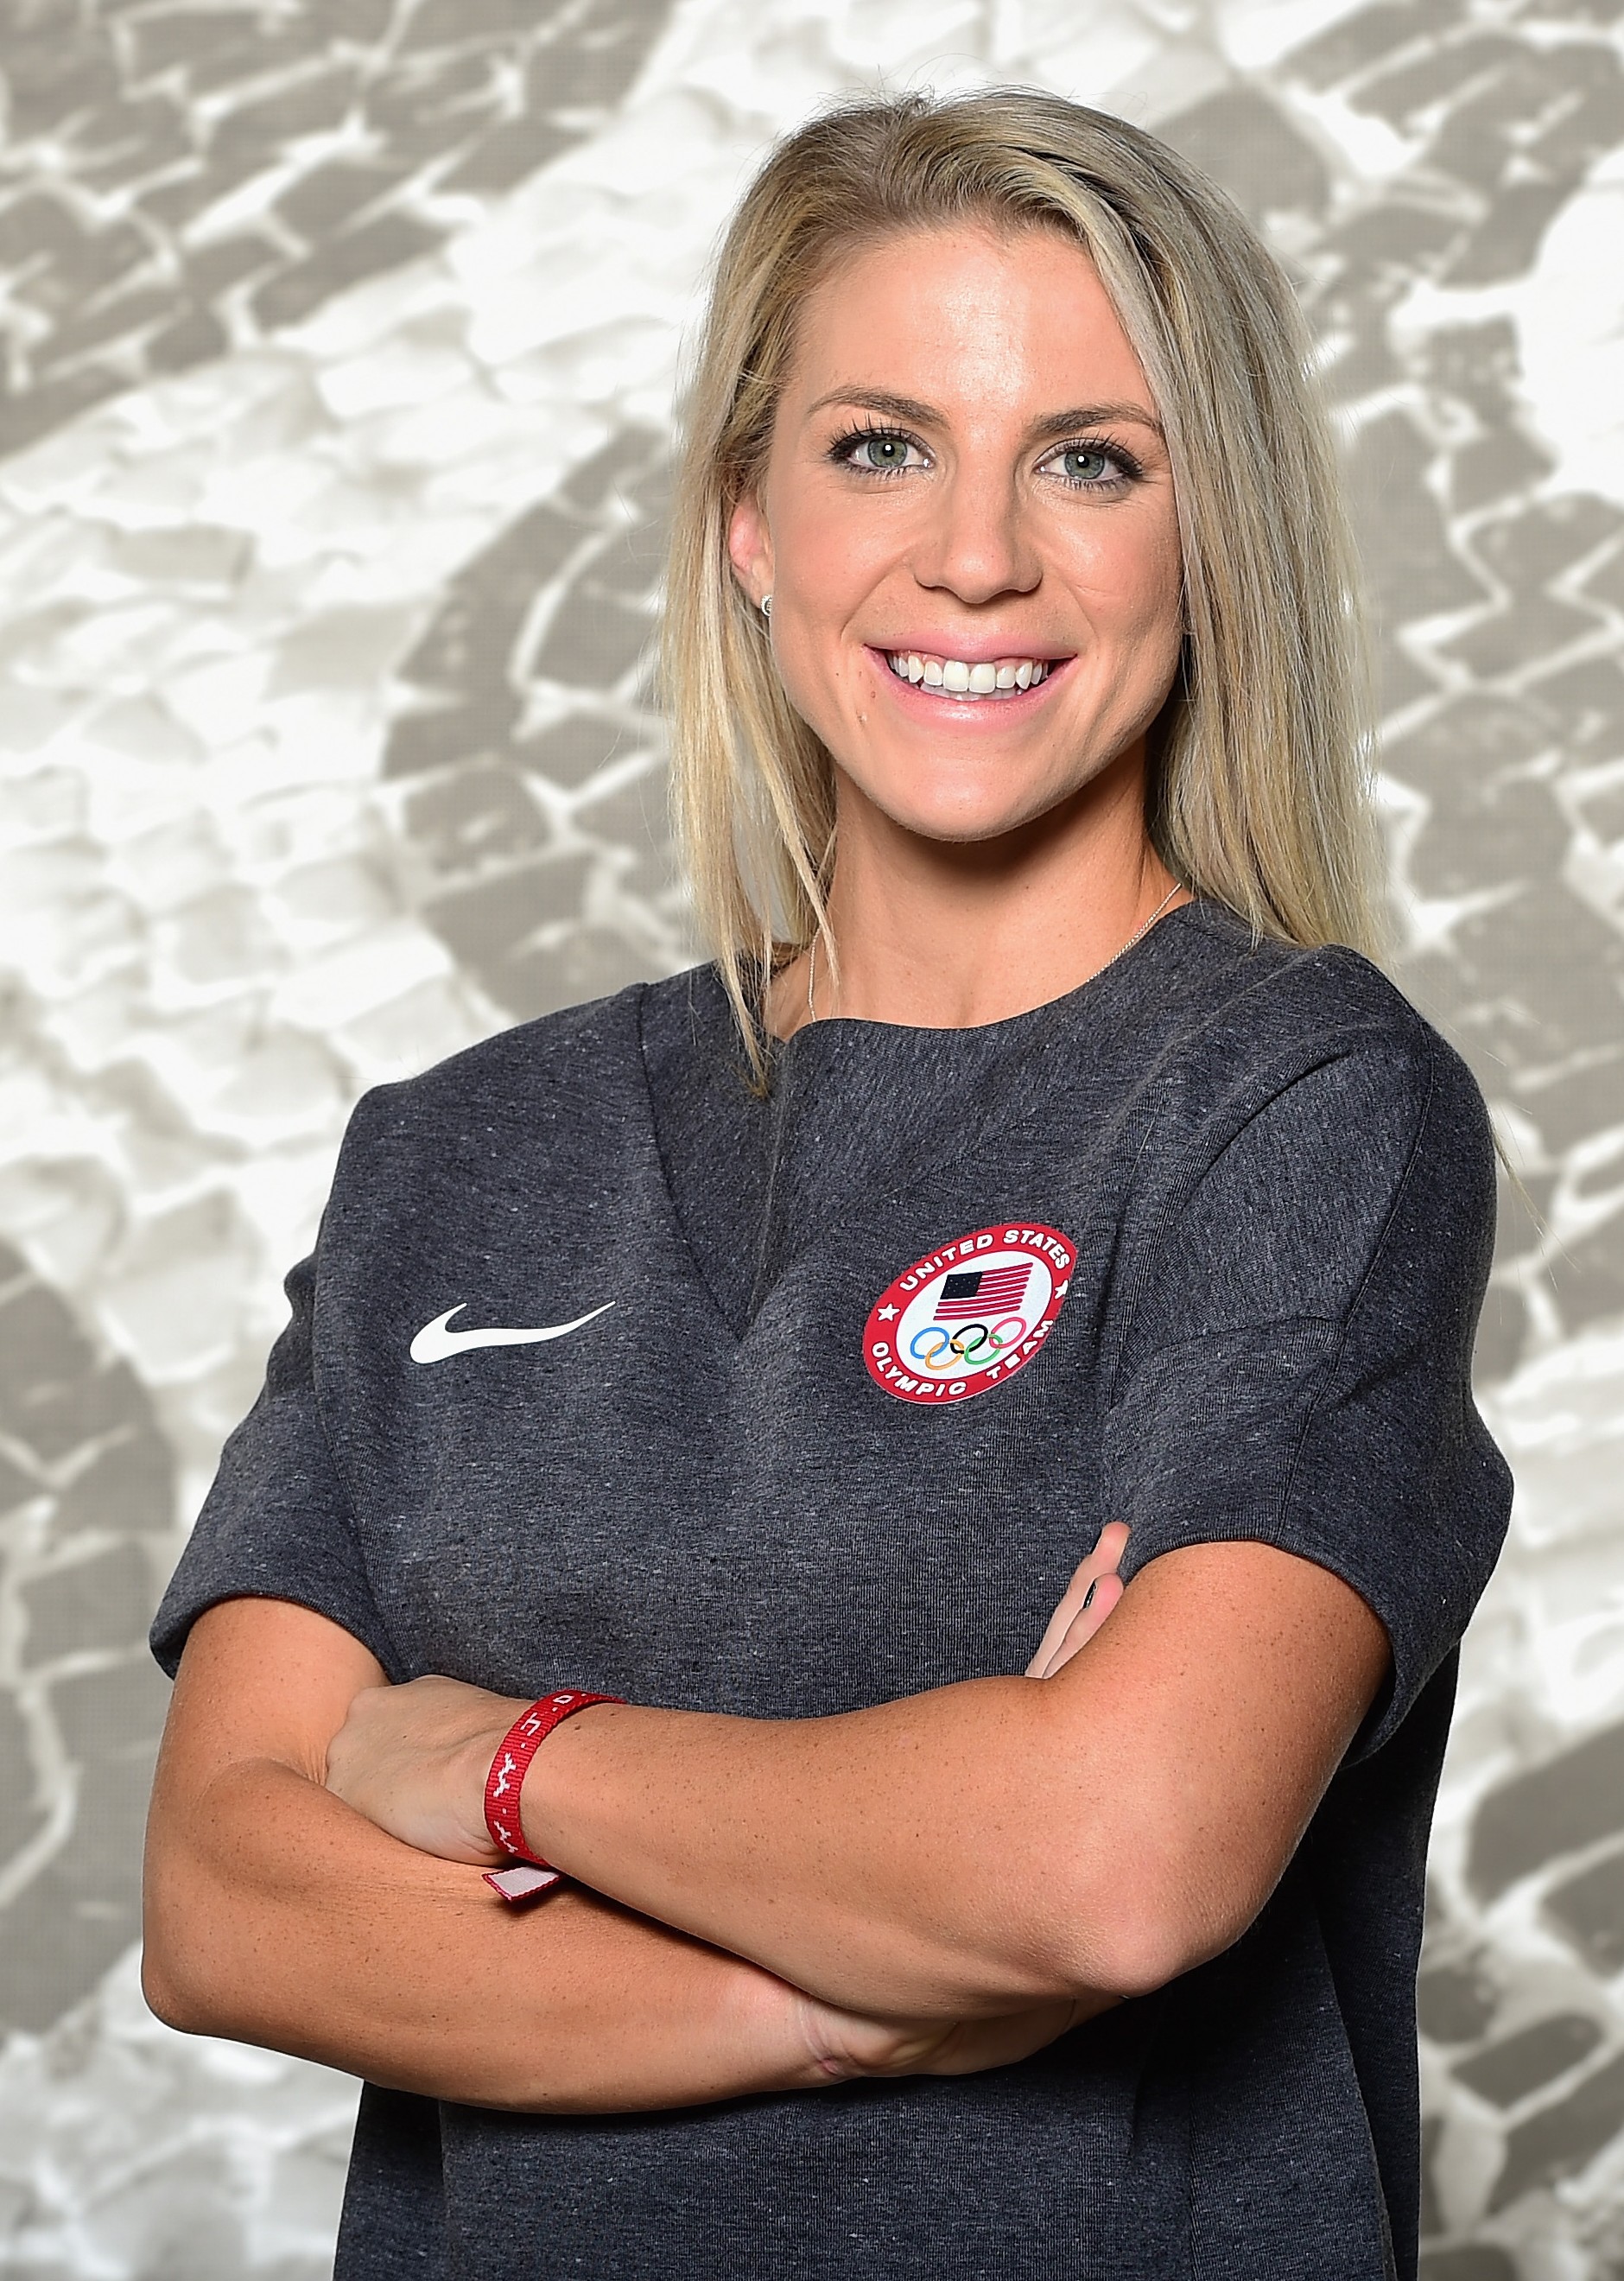 LOS ANGELES, CA - NOVEMBER 17:  Soccer player Julie Johnston poses for a portrait at the USOC Rio Olympics Shoot at Quixote Studios on November 17, 2015 in Los Angeles, California.  (Photo by Harry How/Getty Images)